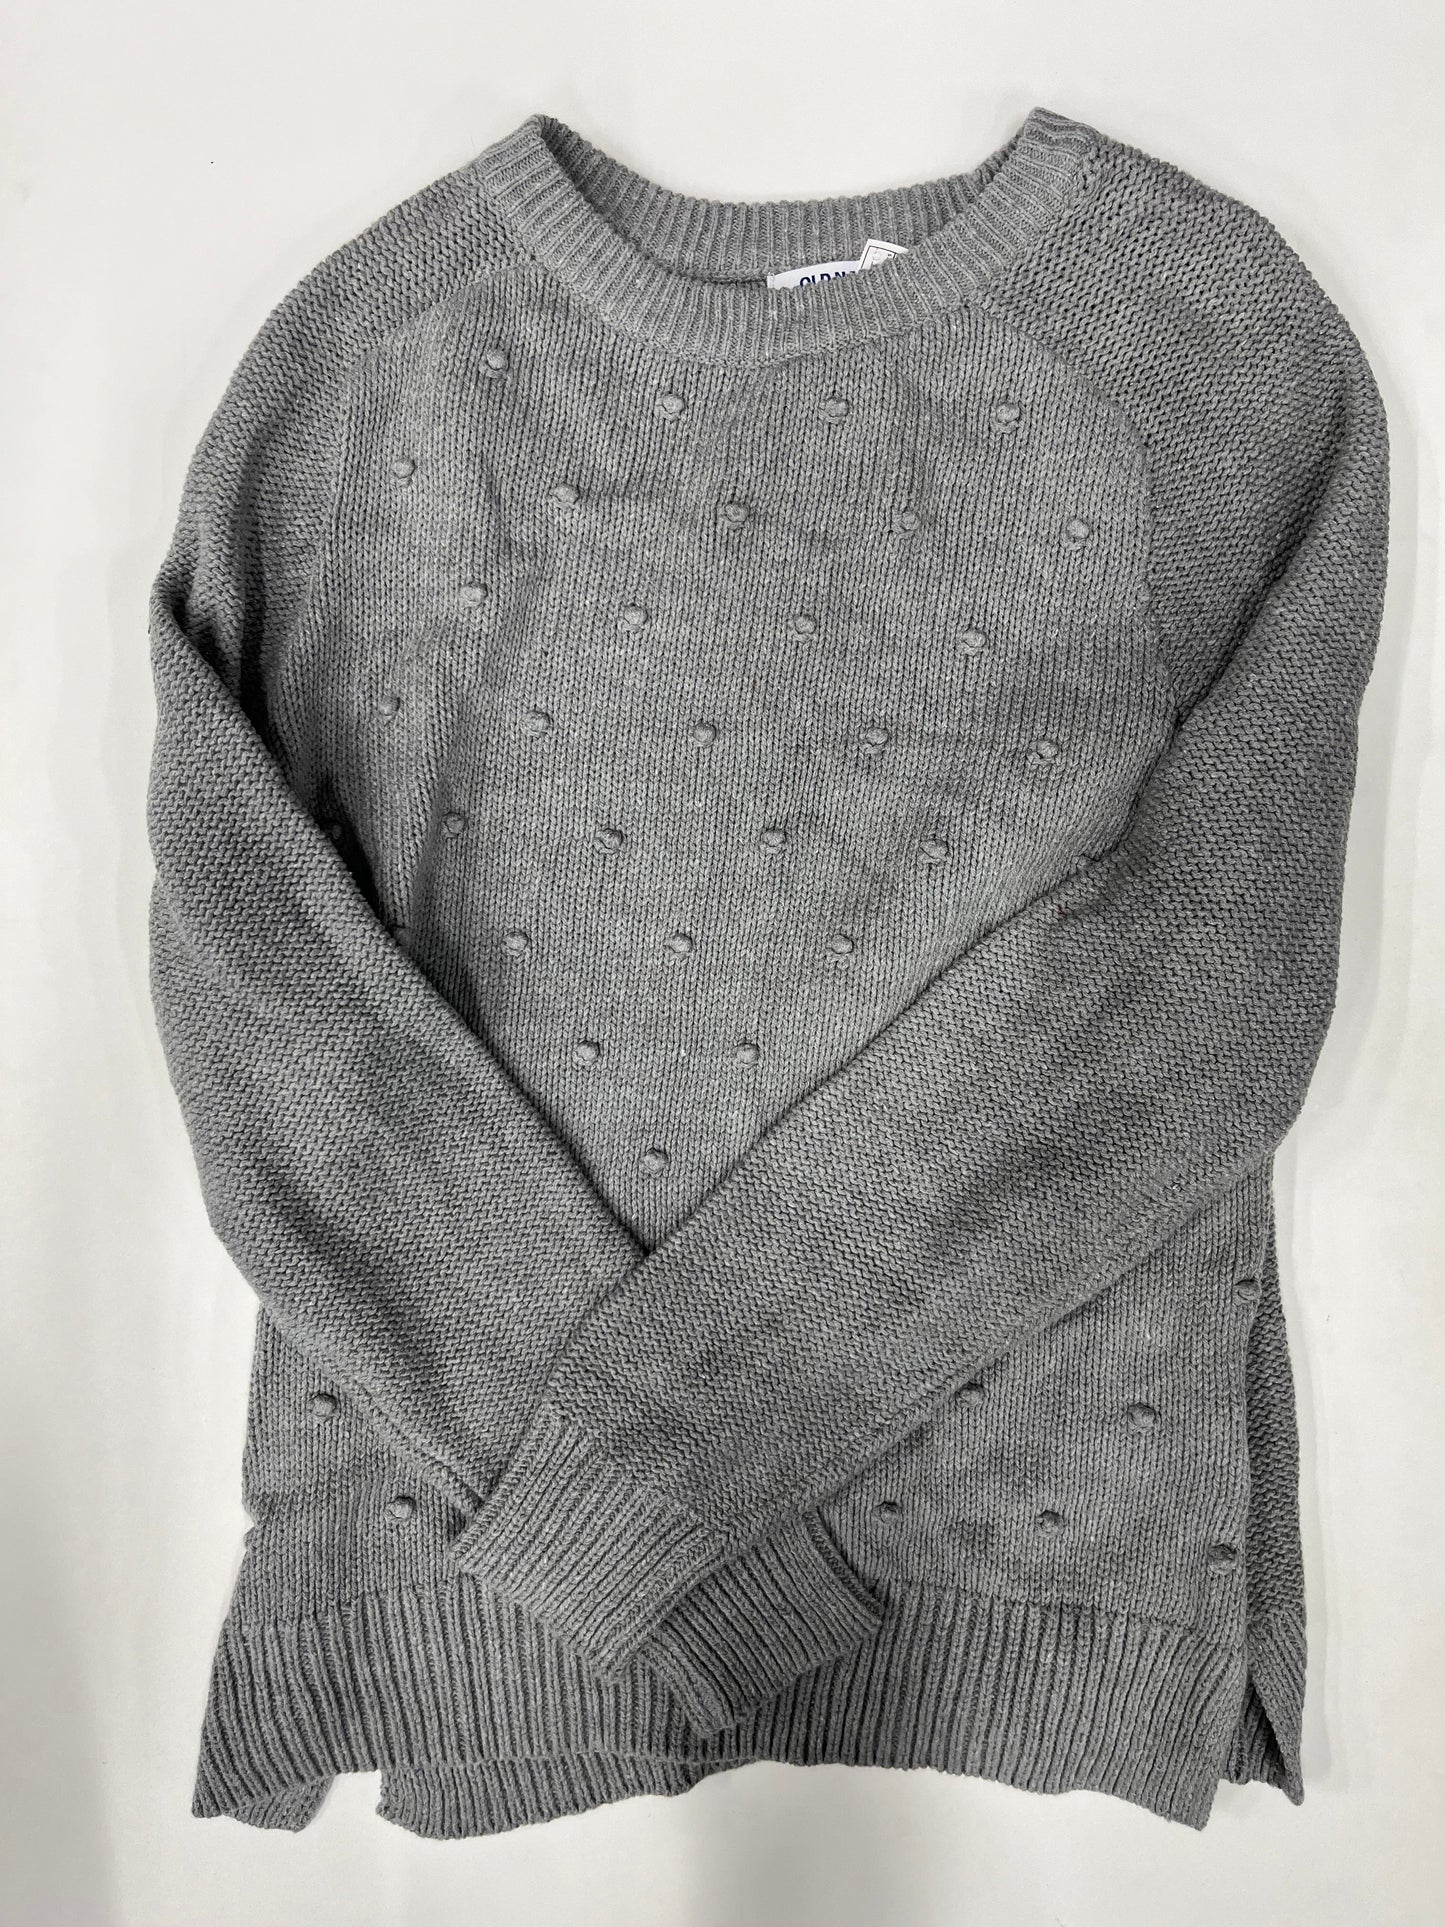 Sweater Cardigan Heavyweight By Old Navy  Size: M